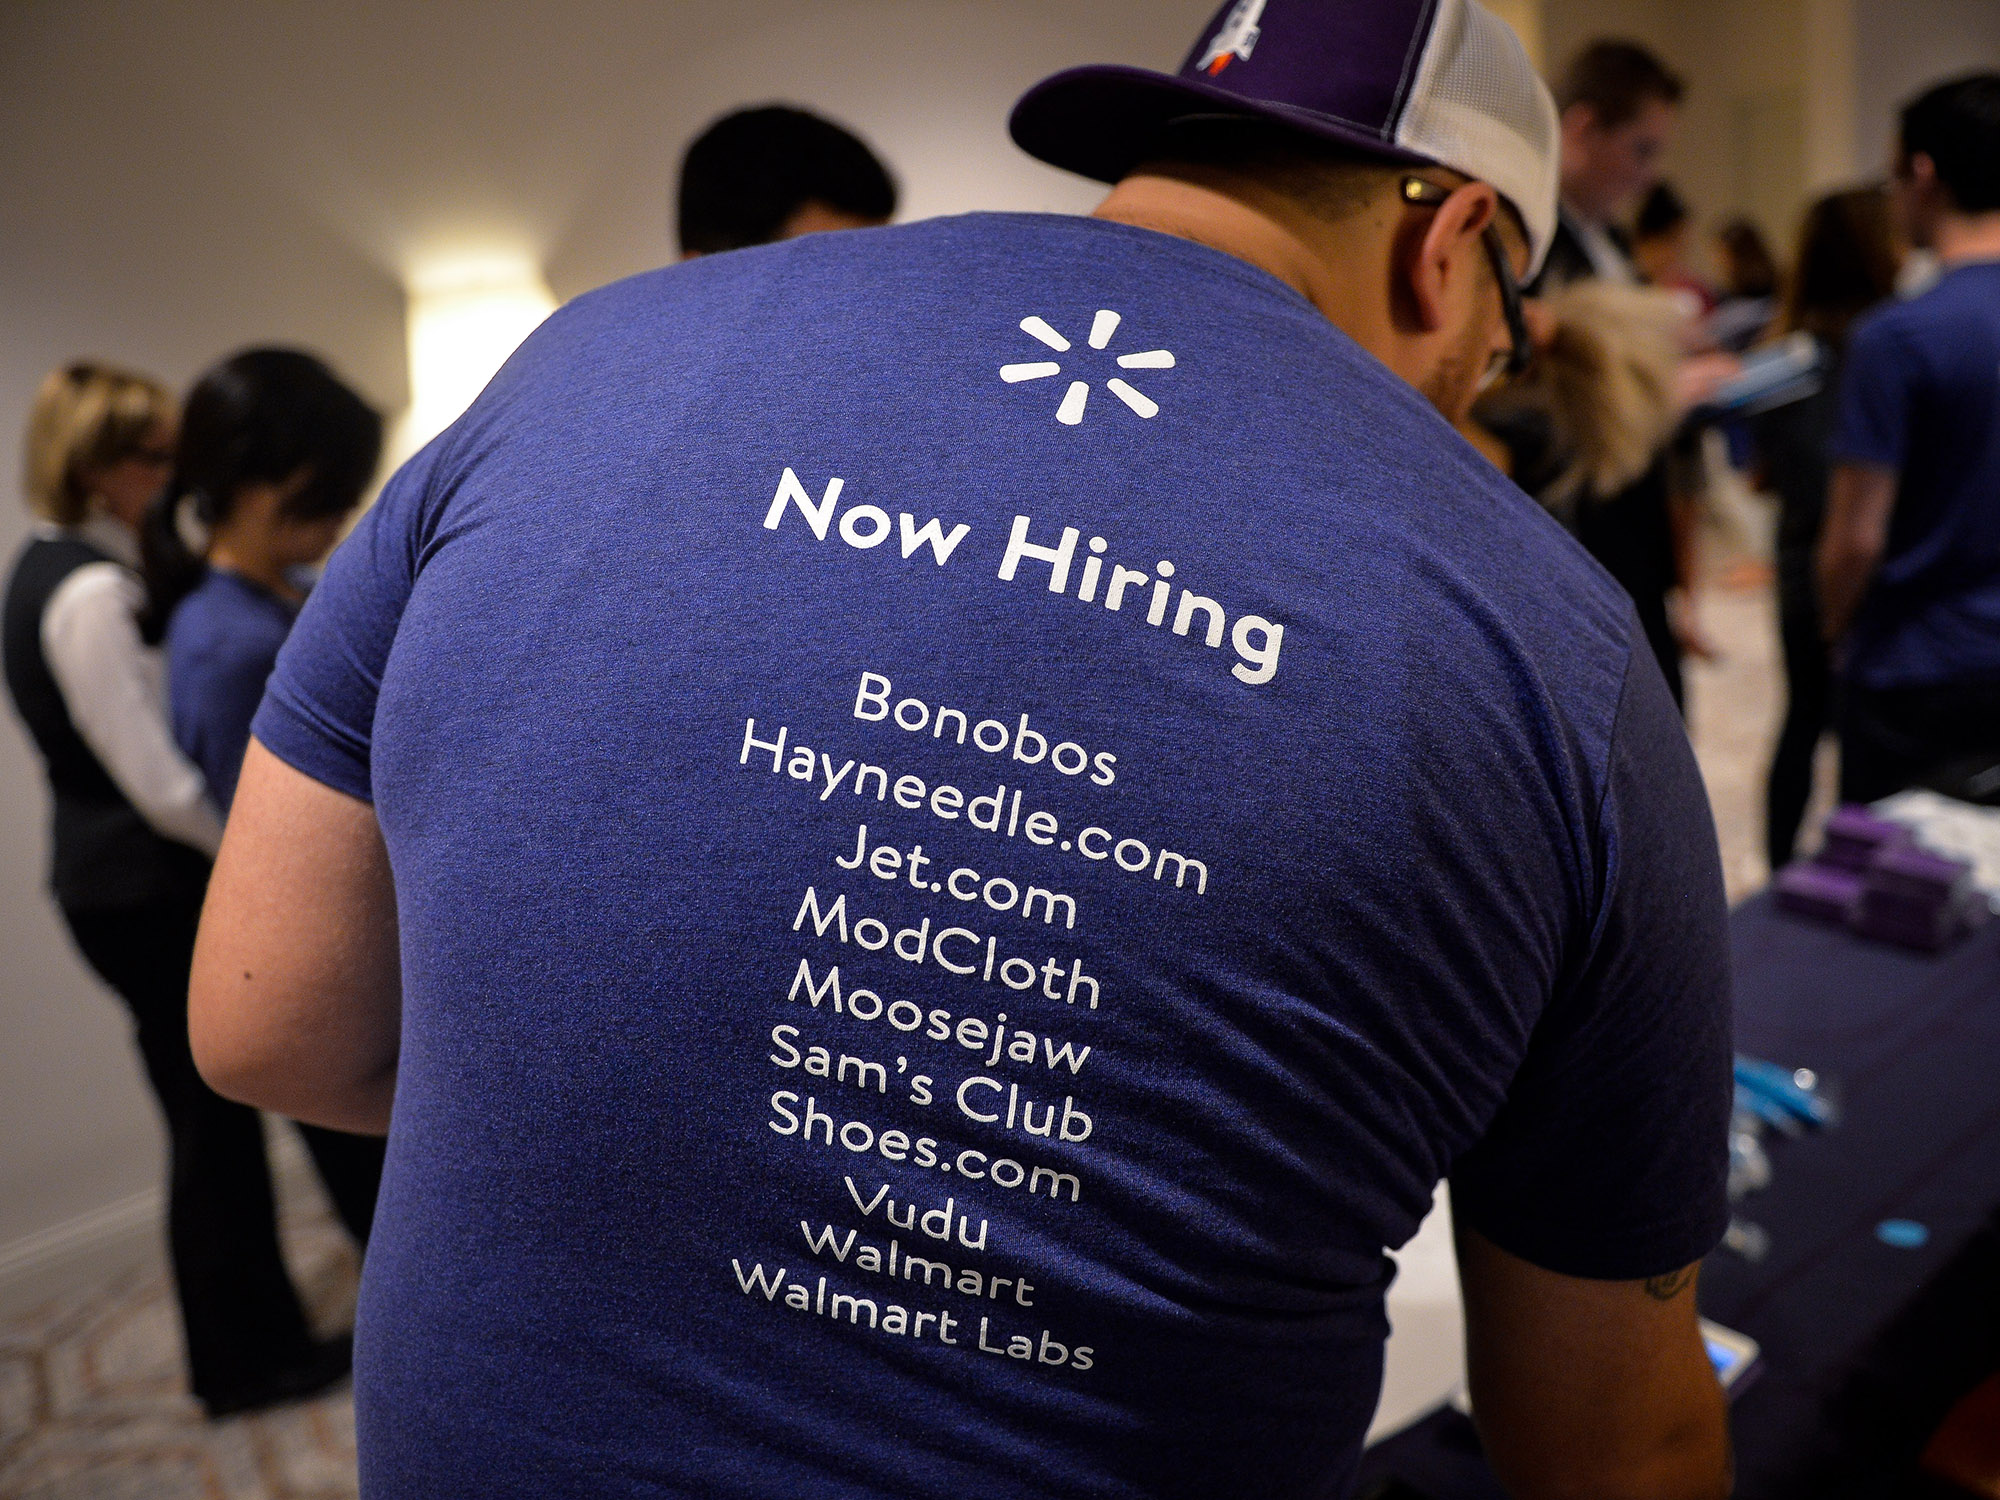 A job recruiter wears a shirt showing all of the Walmart brands during a career fair in Philadelphia.